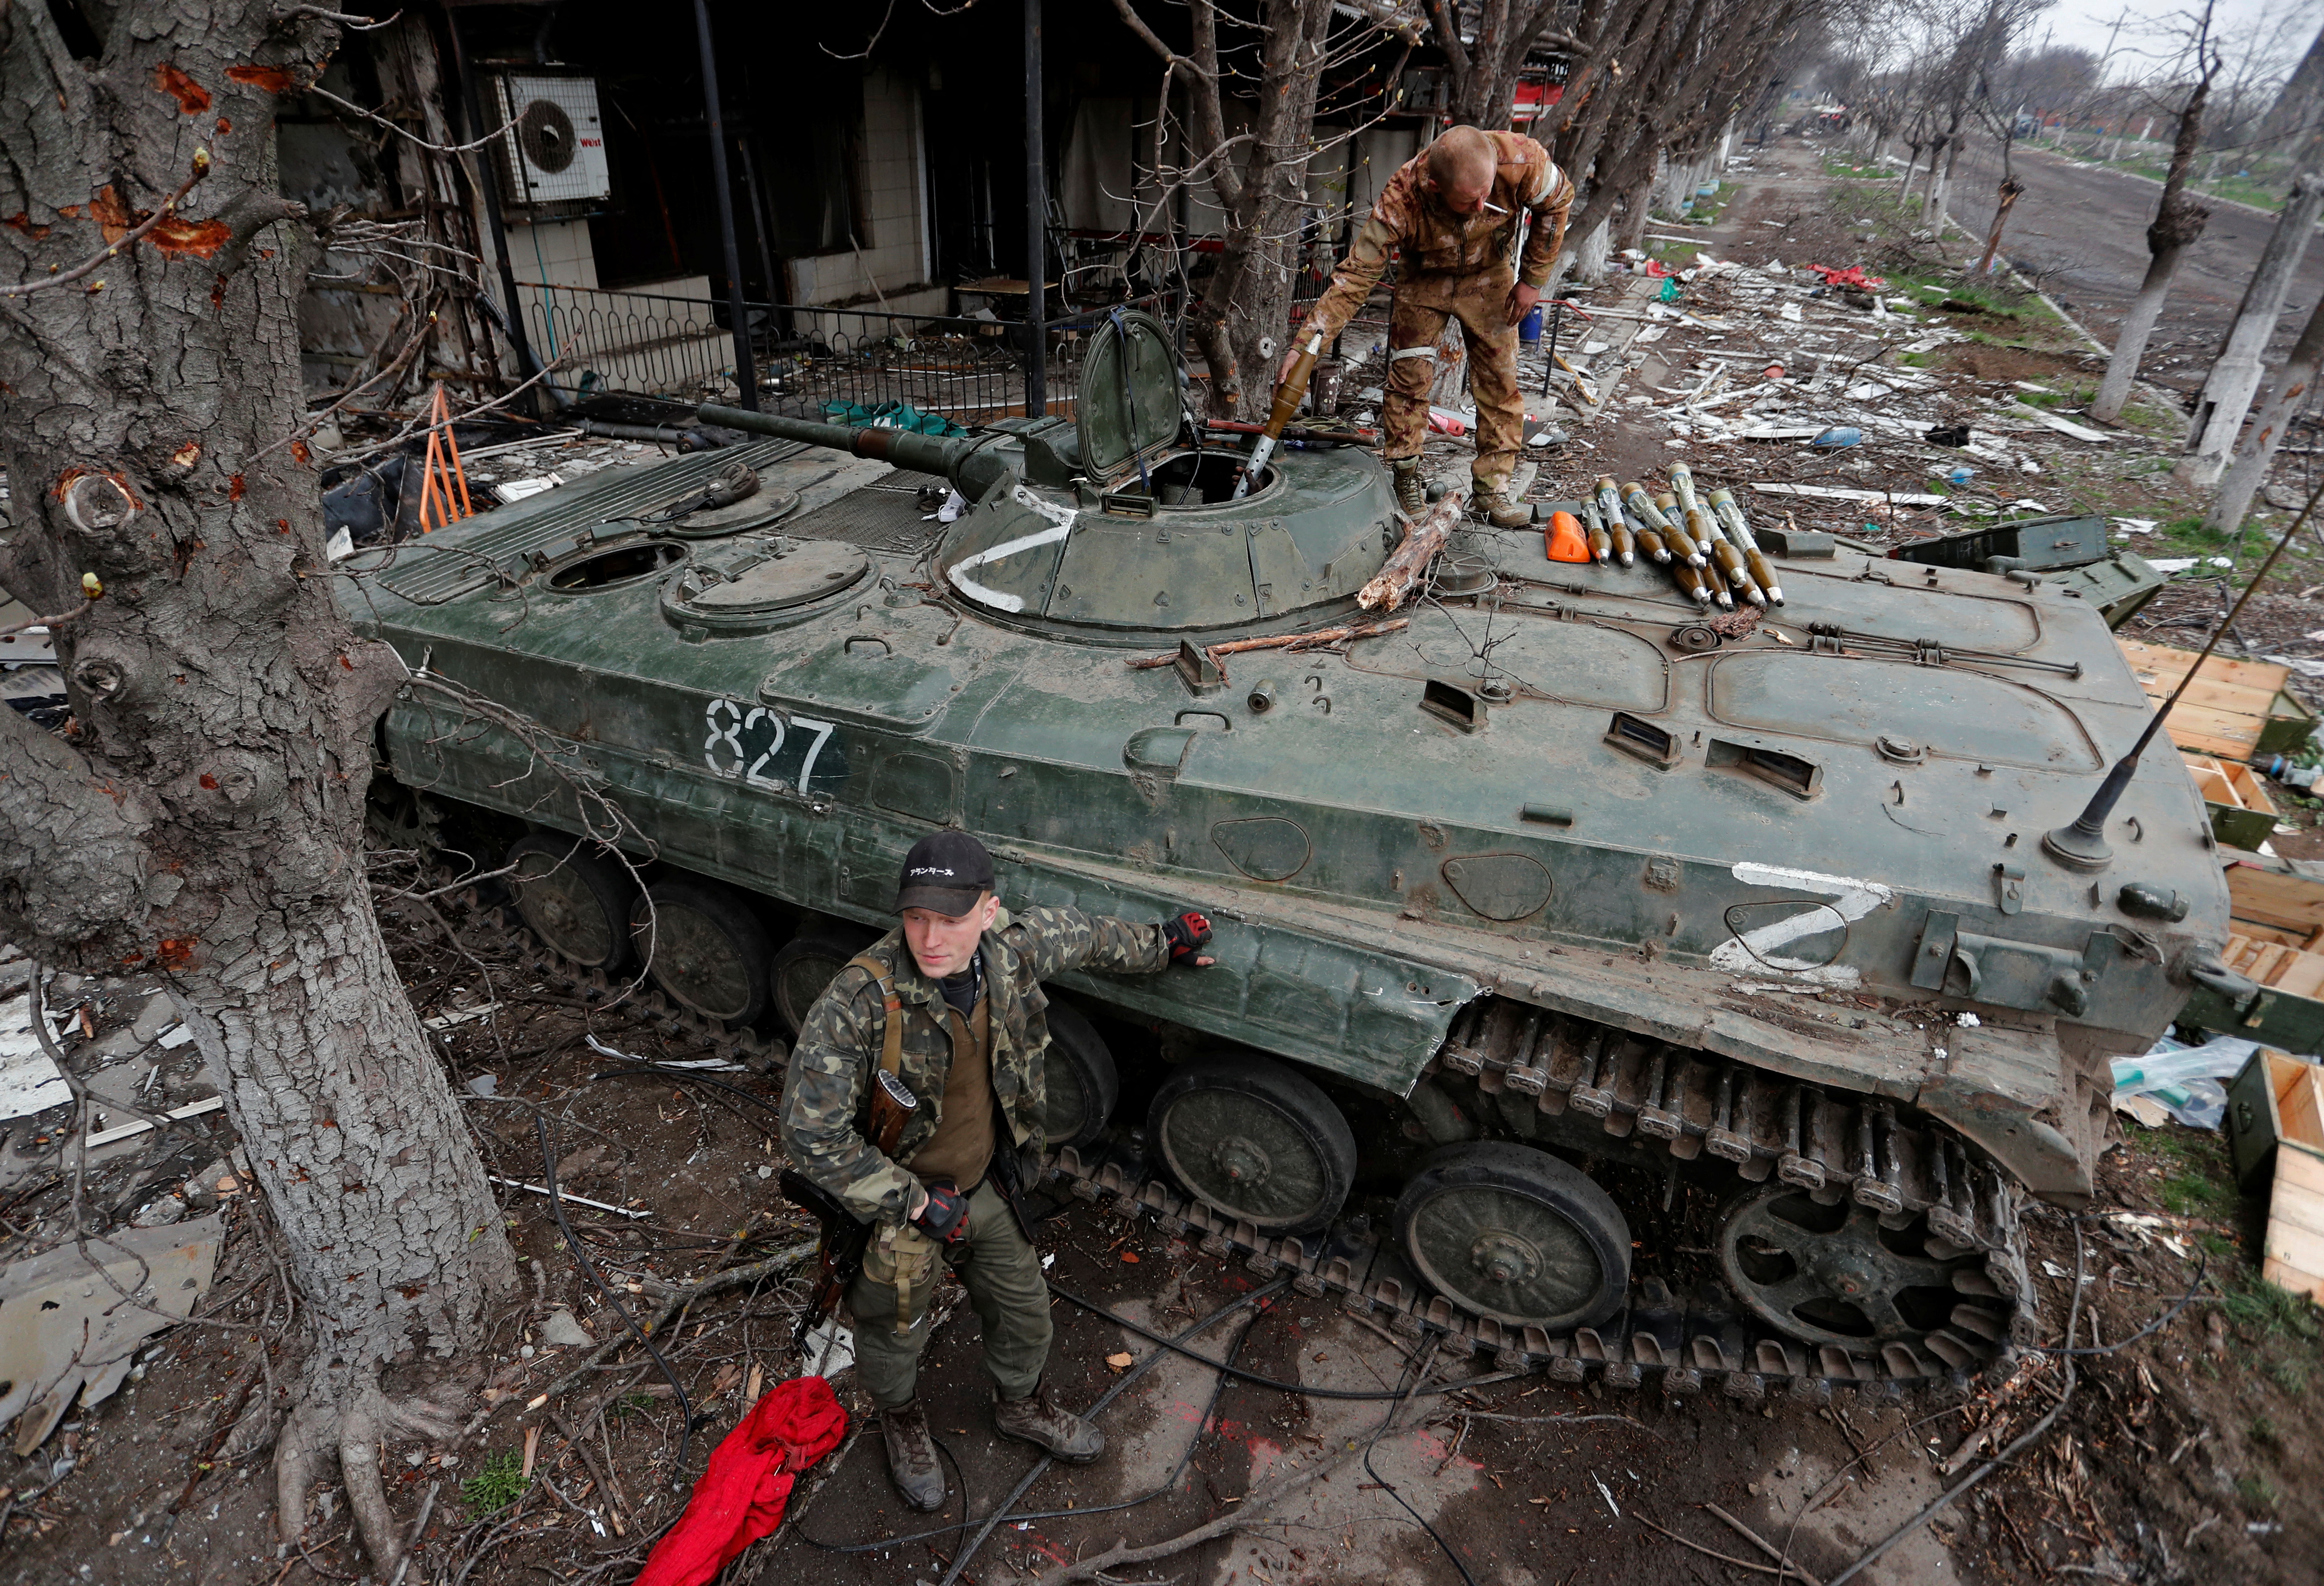 Service members of pro-Russian troops load ammunition into armoured vehicles during fighting in Mariupol